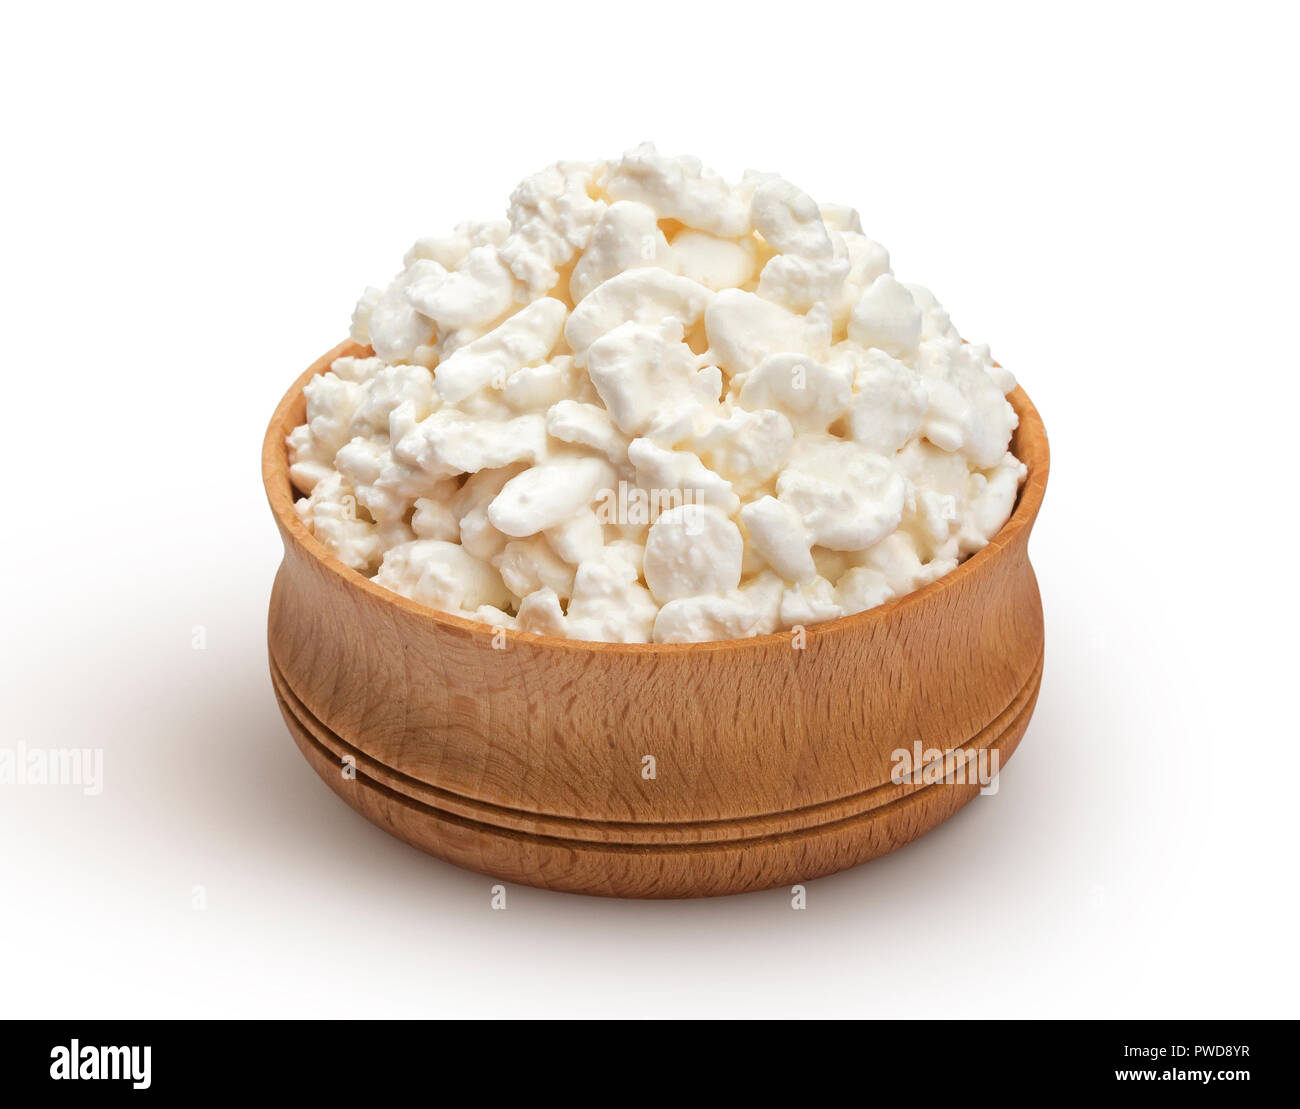 Cottage cheese in wooden bowl isolated on white background Stock Photo